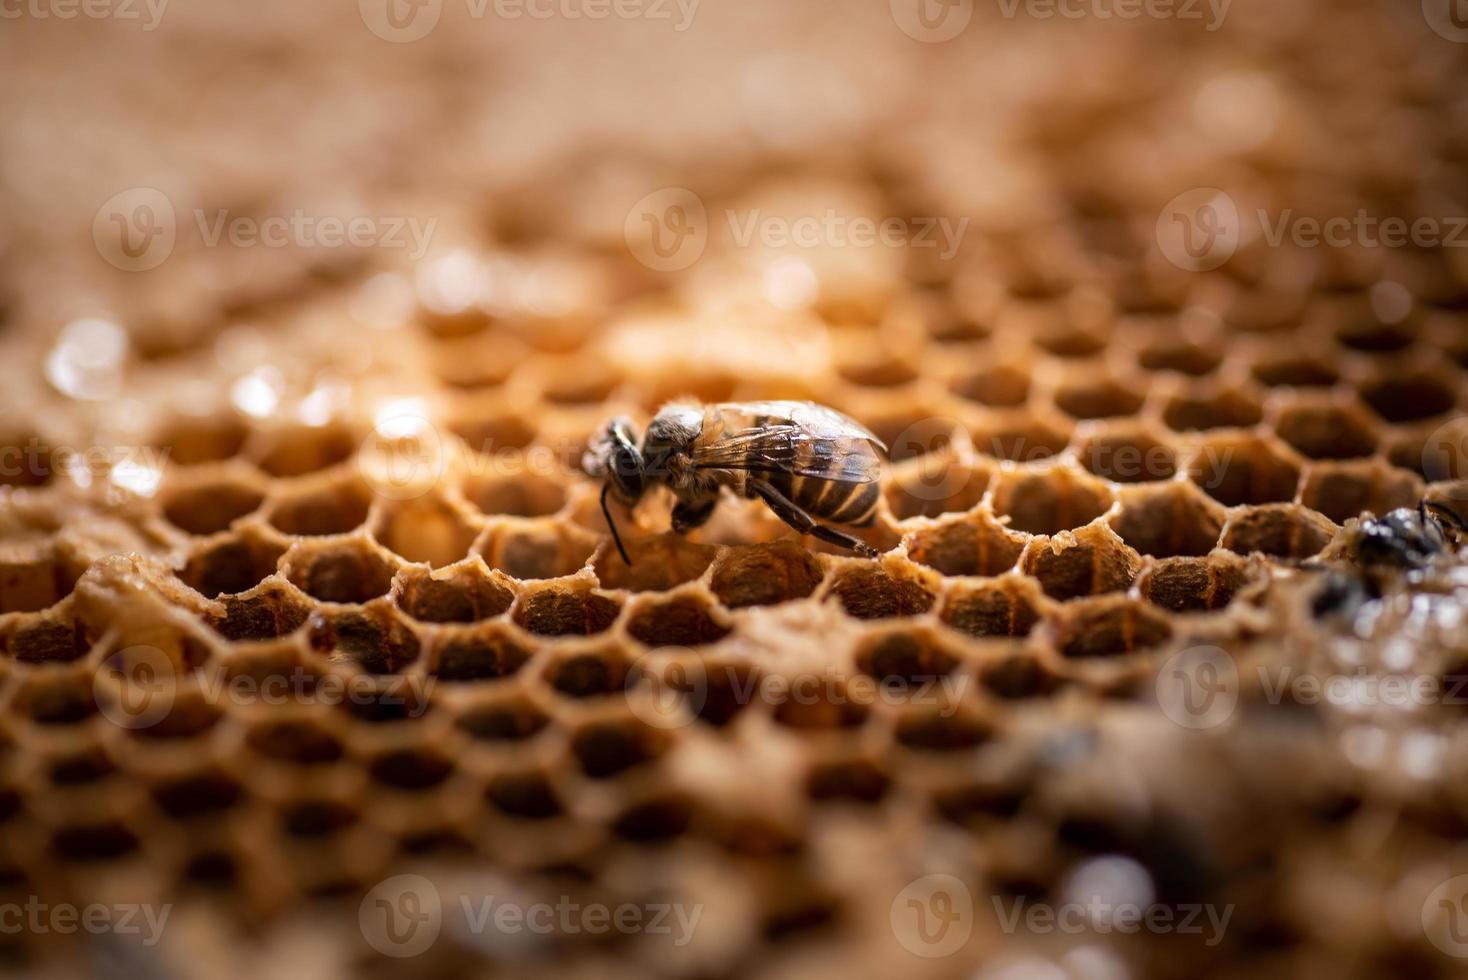 Worker bee in its hive in the wild photo